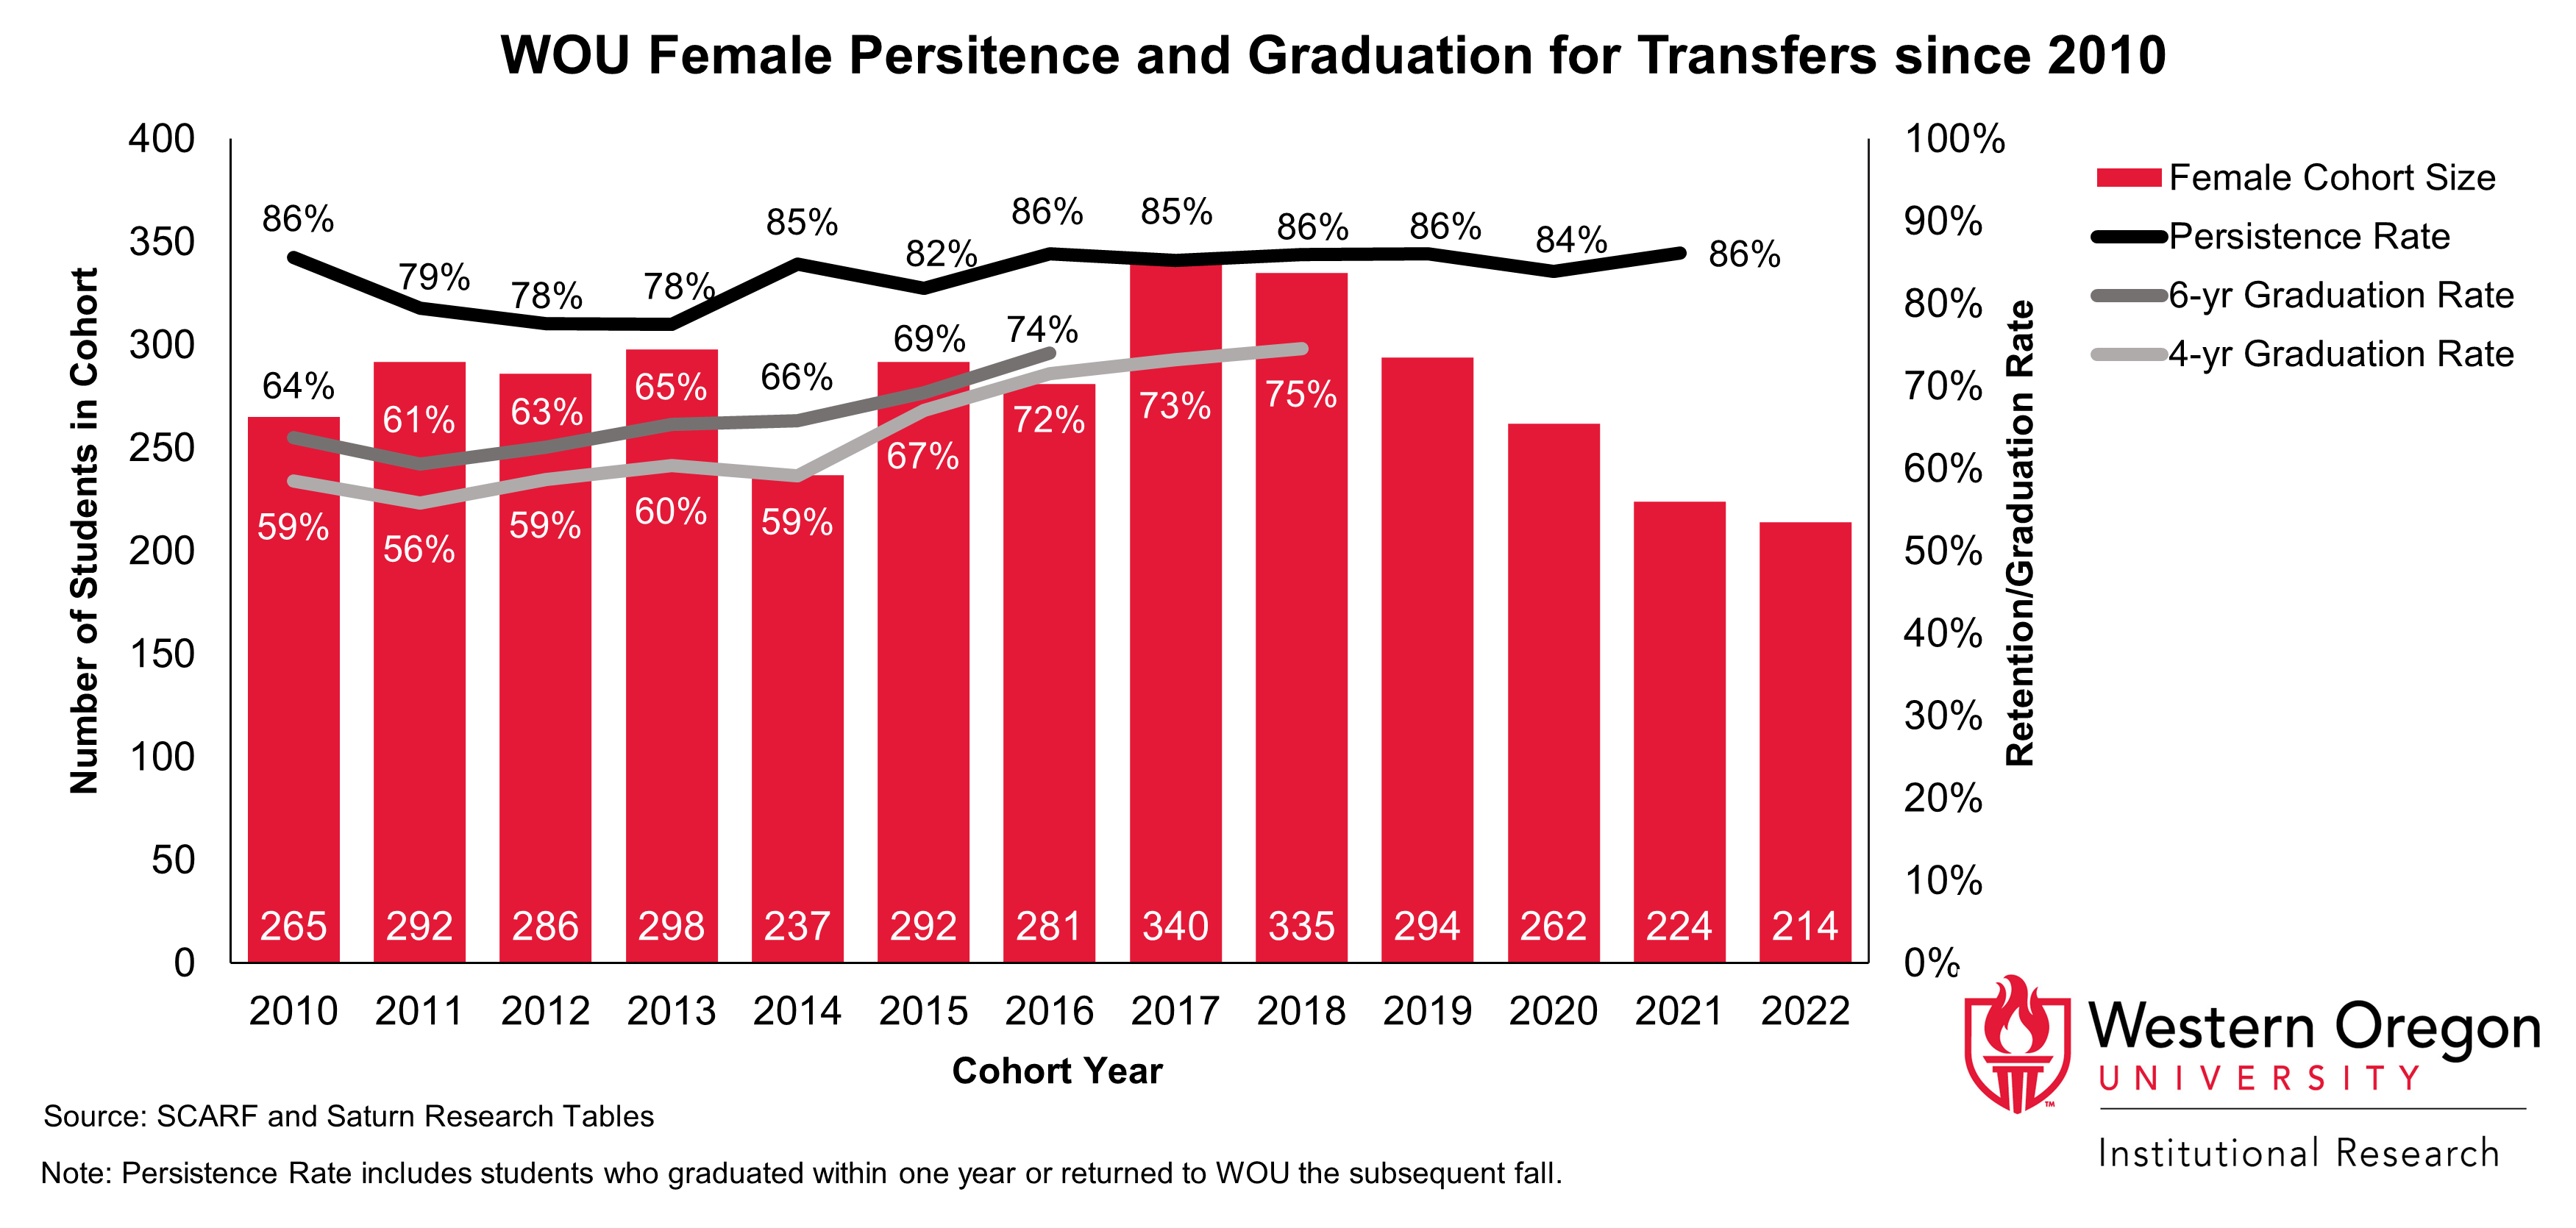 Bar and line graph of retention and 4- and 6-year graduation rates since 2010 for WOU transfer students that are female, showing that graduation rates have been steadily increasing while retention rates have remained largely stable